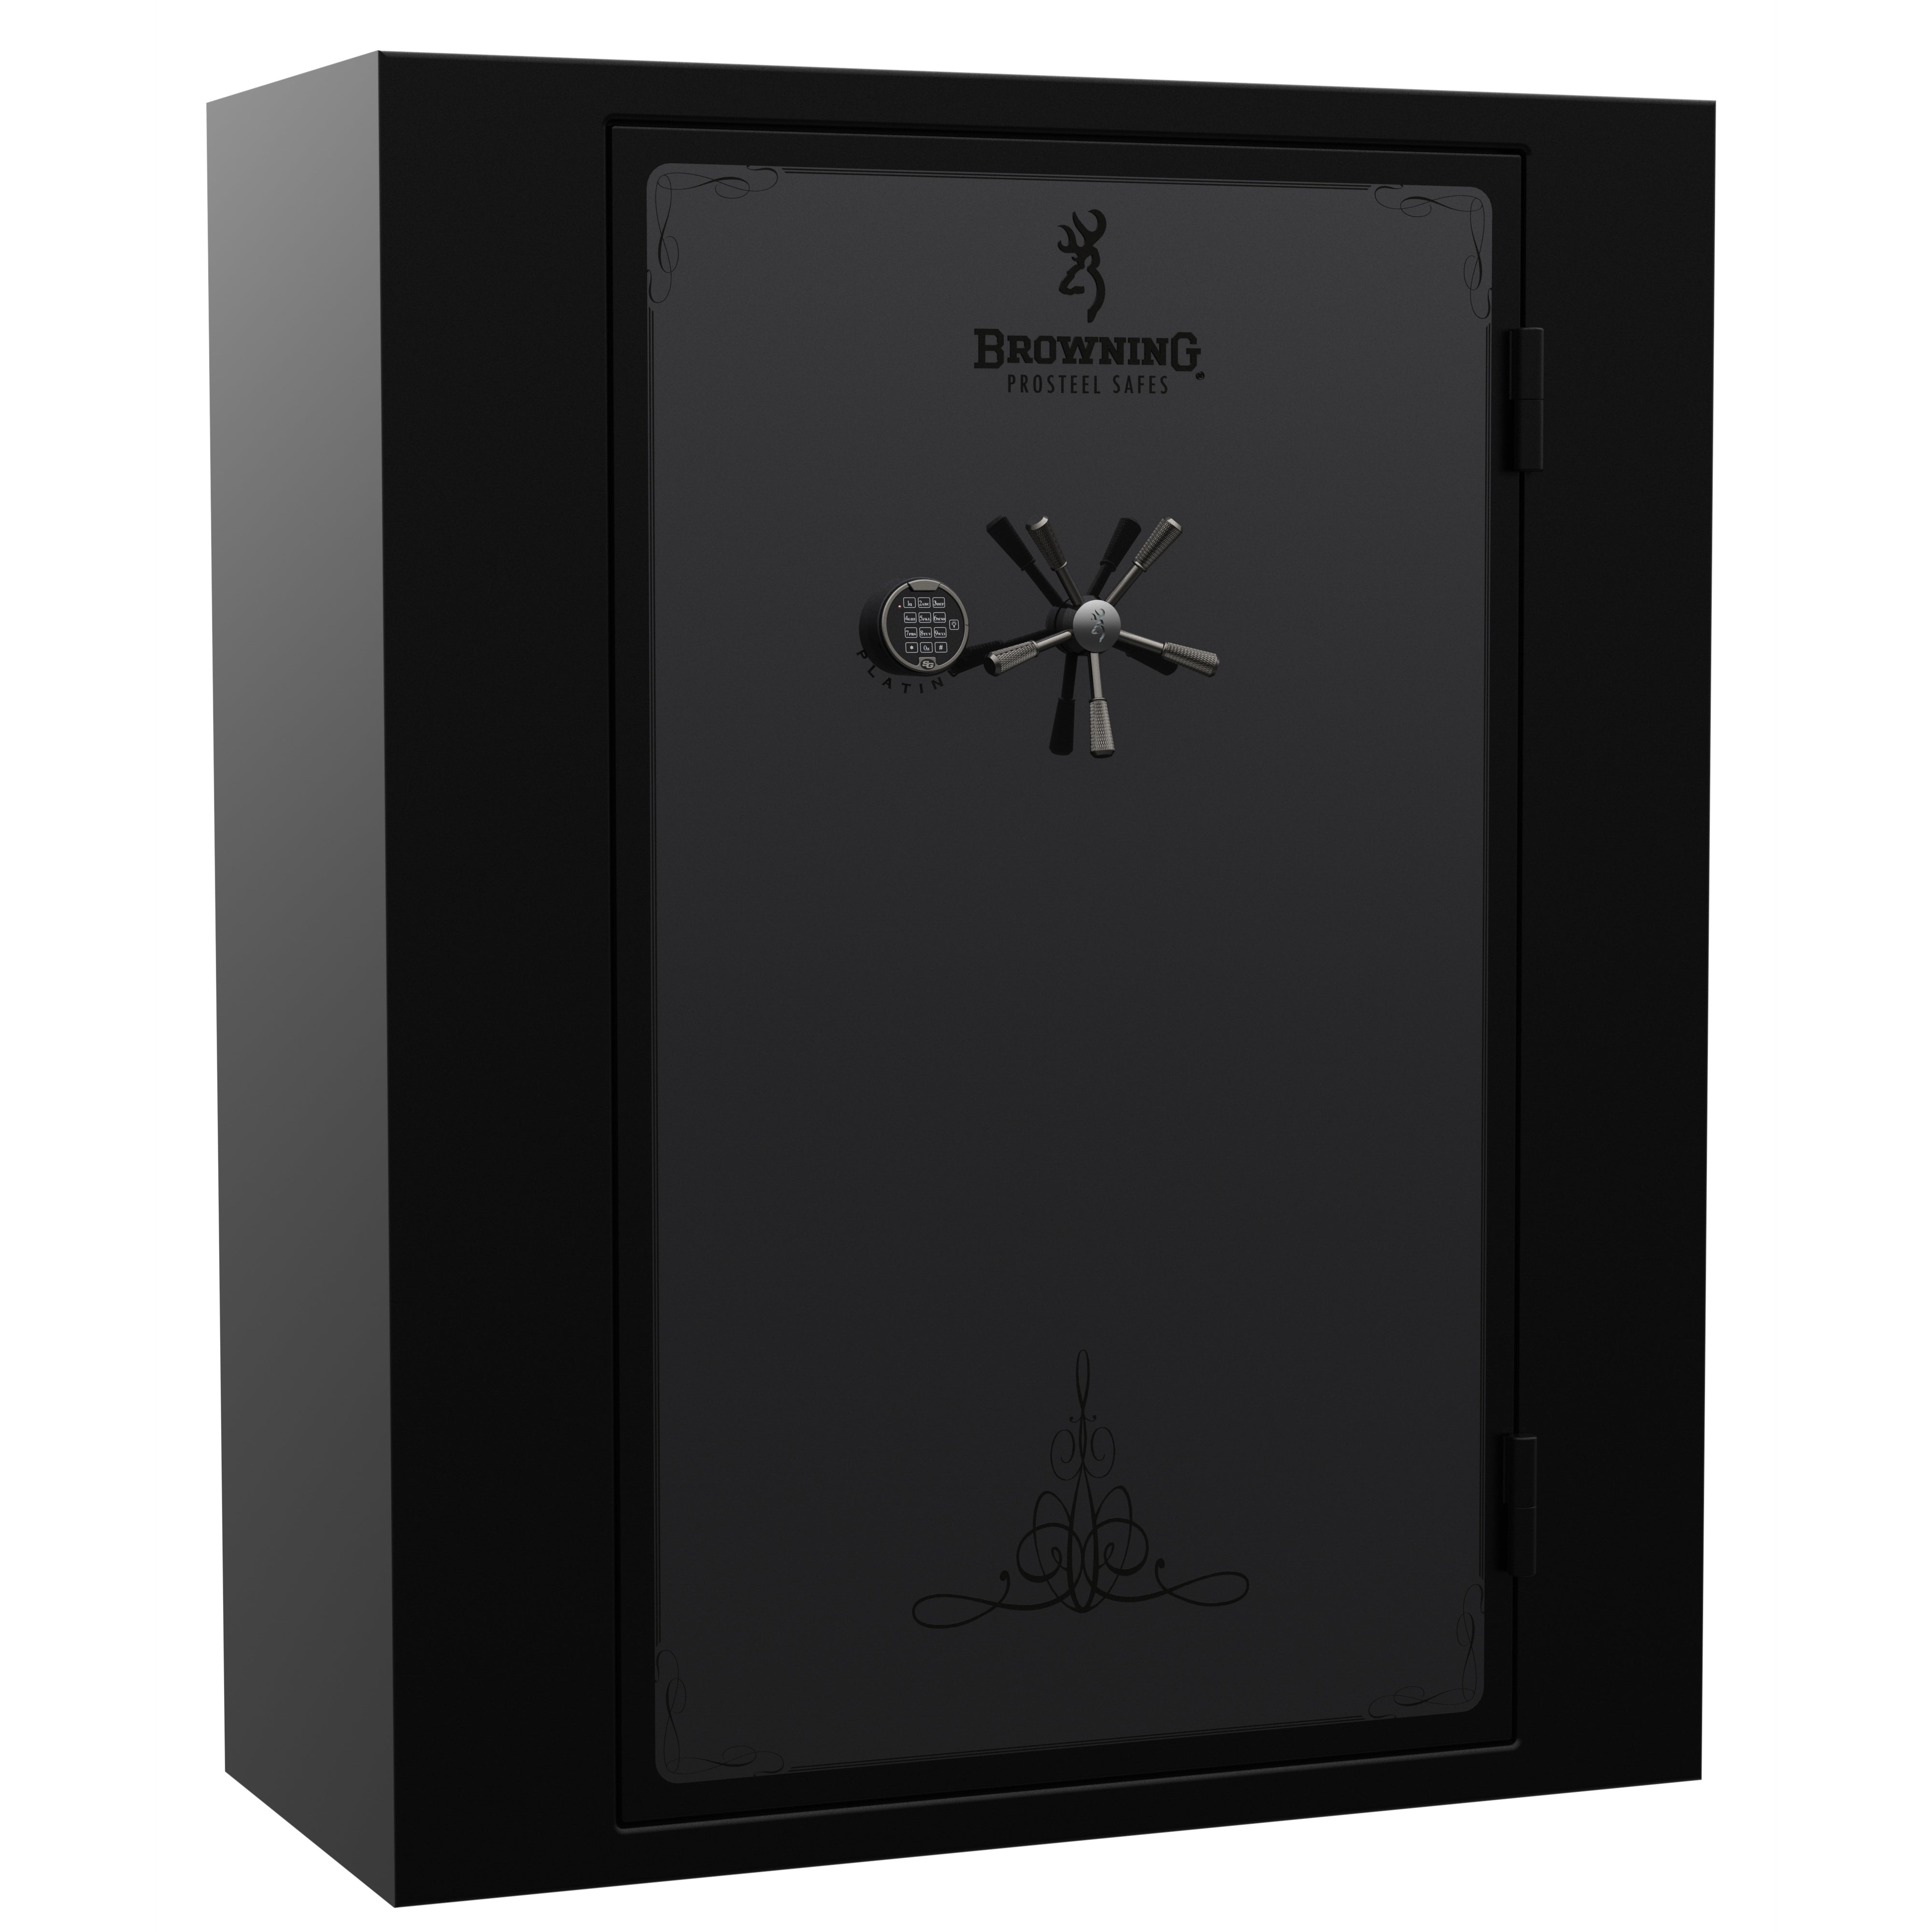 Browning Platinum Plus 65 Tall Extra Wide Gun Safe PP65T Browning PP65T Two Tone  - USASafeAndVault